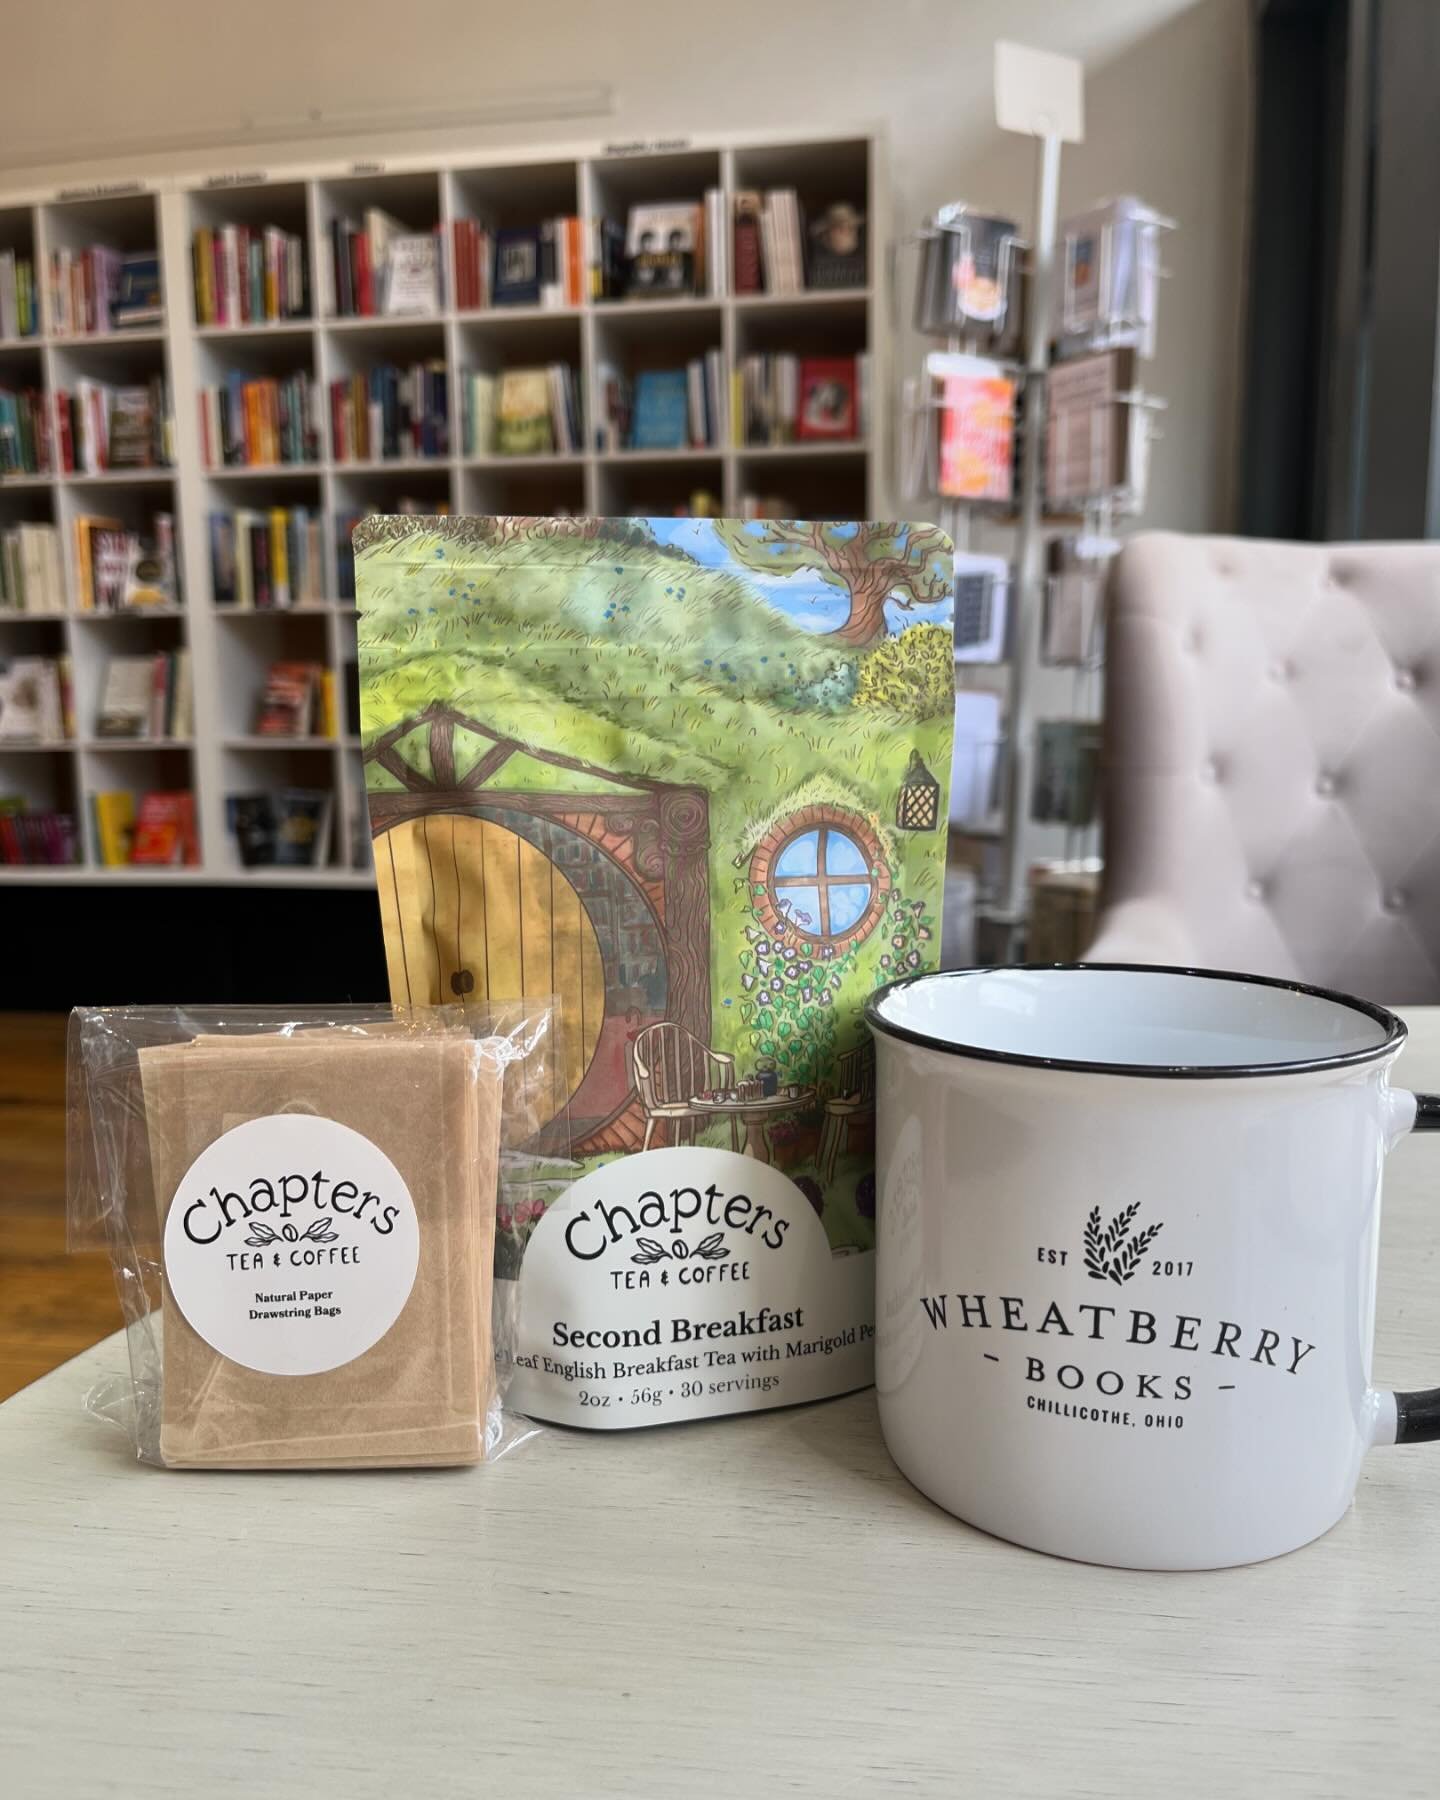 When you shop with us on Independent Bookstore Day (this Saturday 4/27), you can enter to win one of four bundles. 
🫖 The Tea Lover&rsquo;s bundle includes a Wheatberry Books mug, your preferred blend of Chapters tea, and a pack of tea bags. 
🚫The 